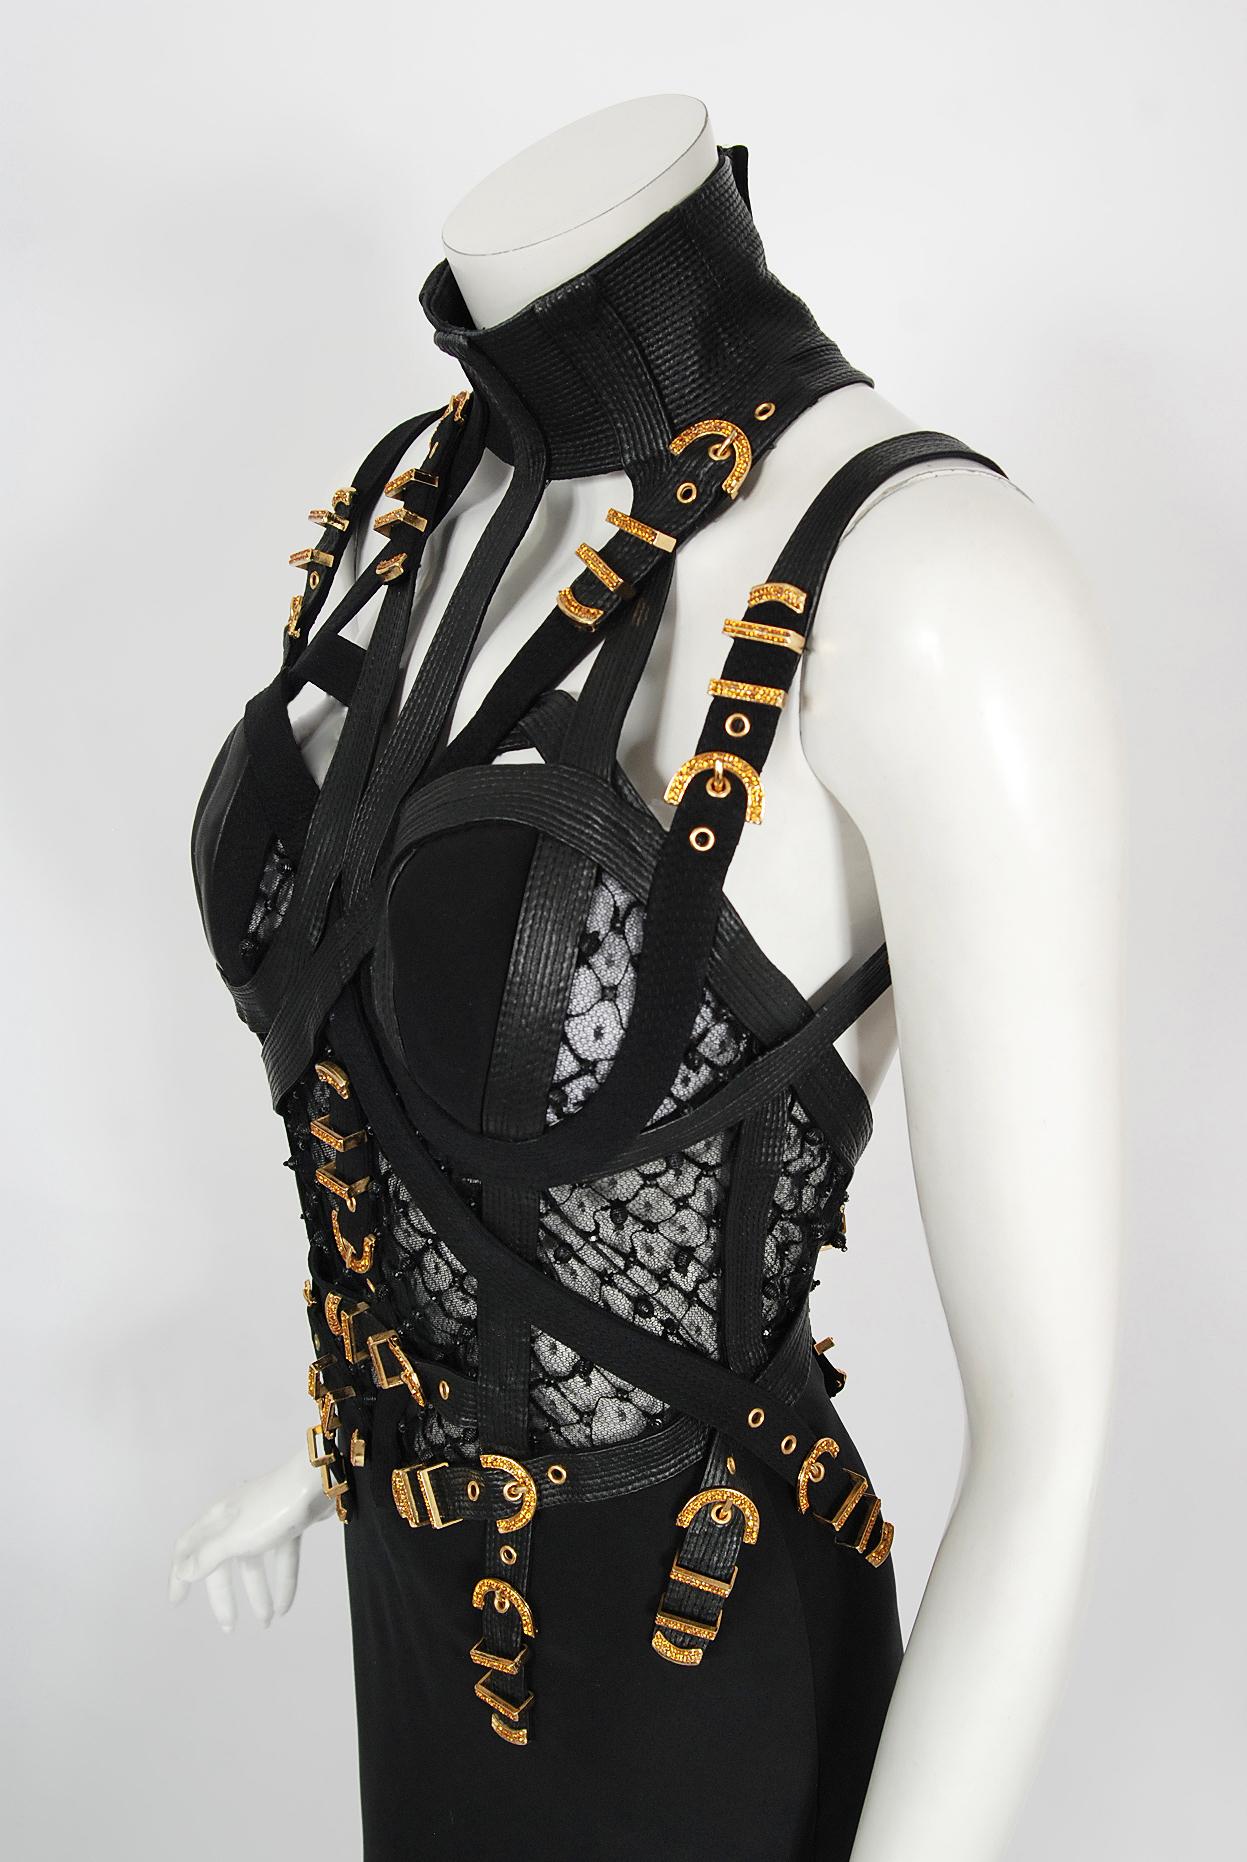 Iconic 1992 Gianni Versace Couture Documented Black Bondage Silk Leather Gown  For Sale 6